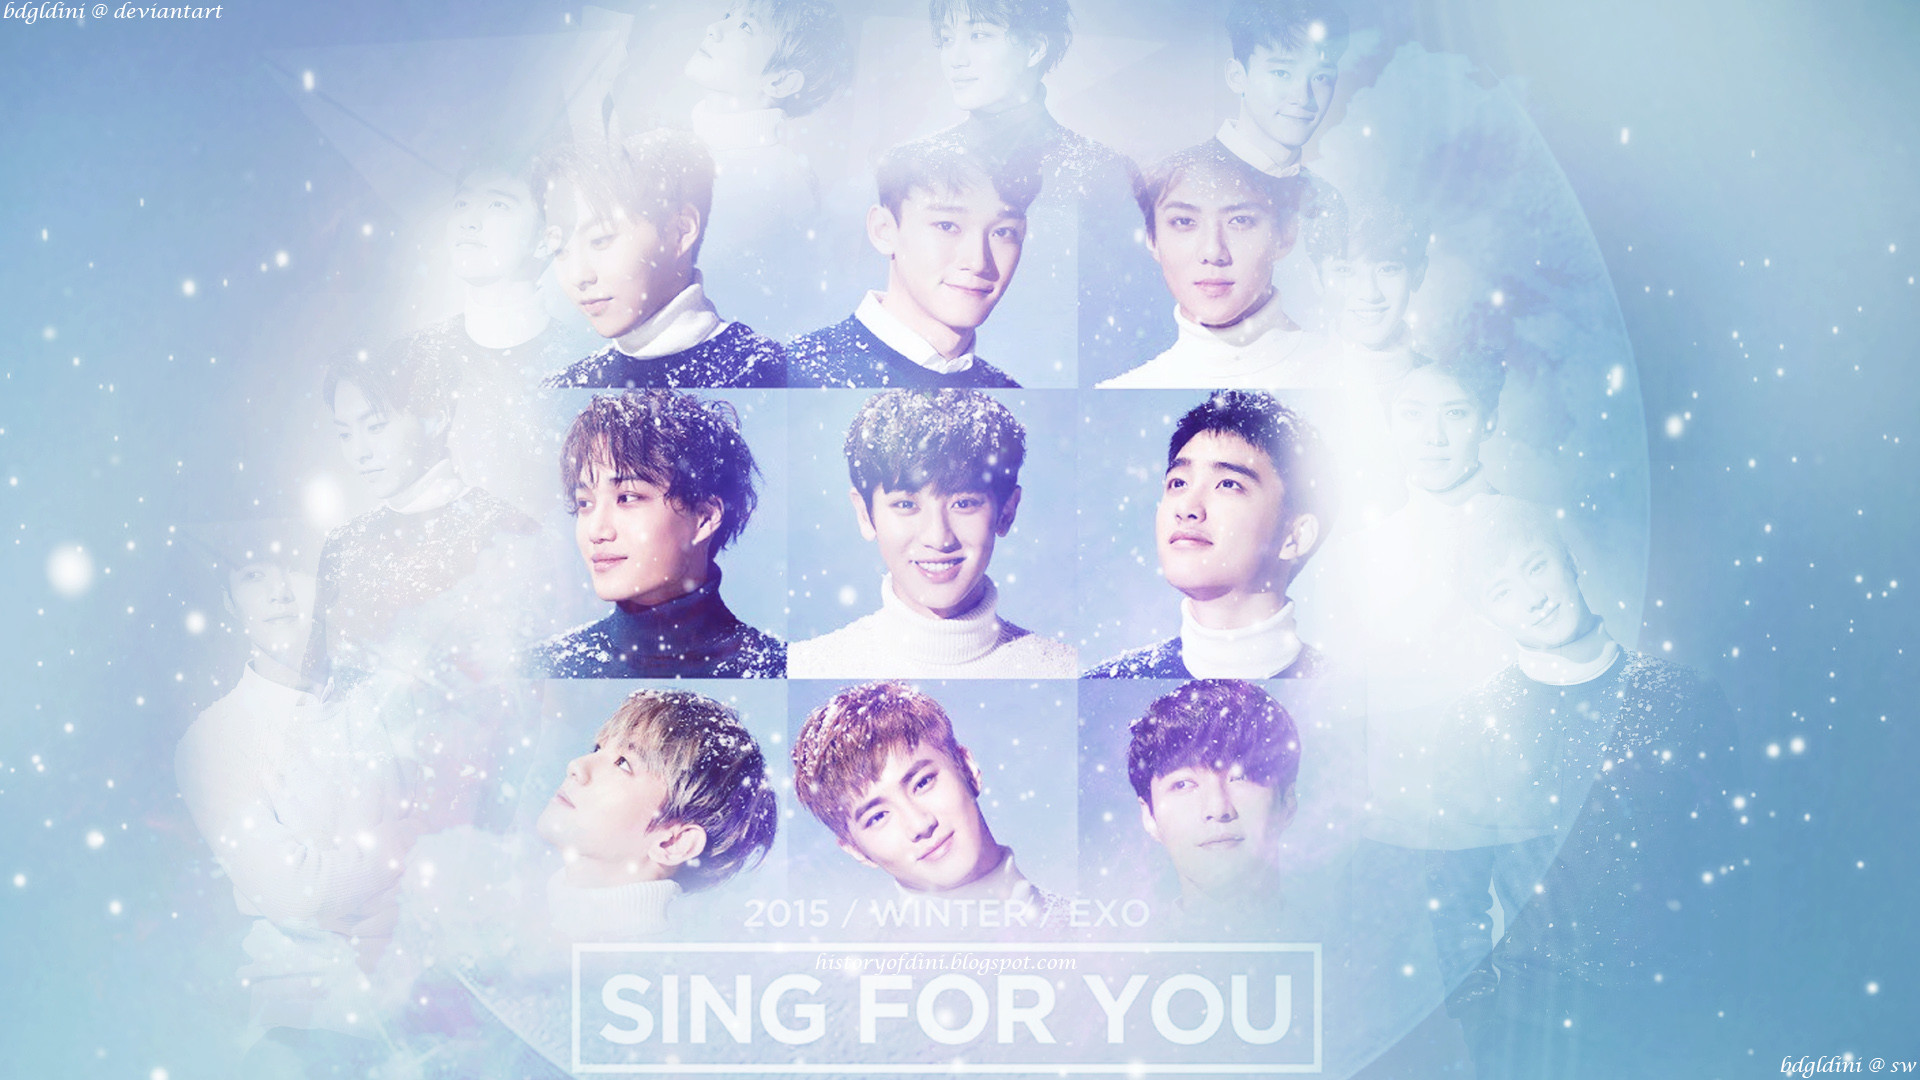 1920x1080 [WALLPAPER] EXO - Sing For You + PSD File